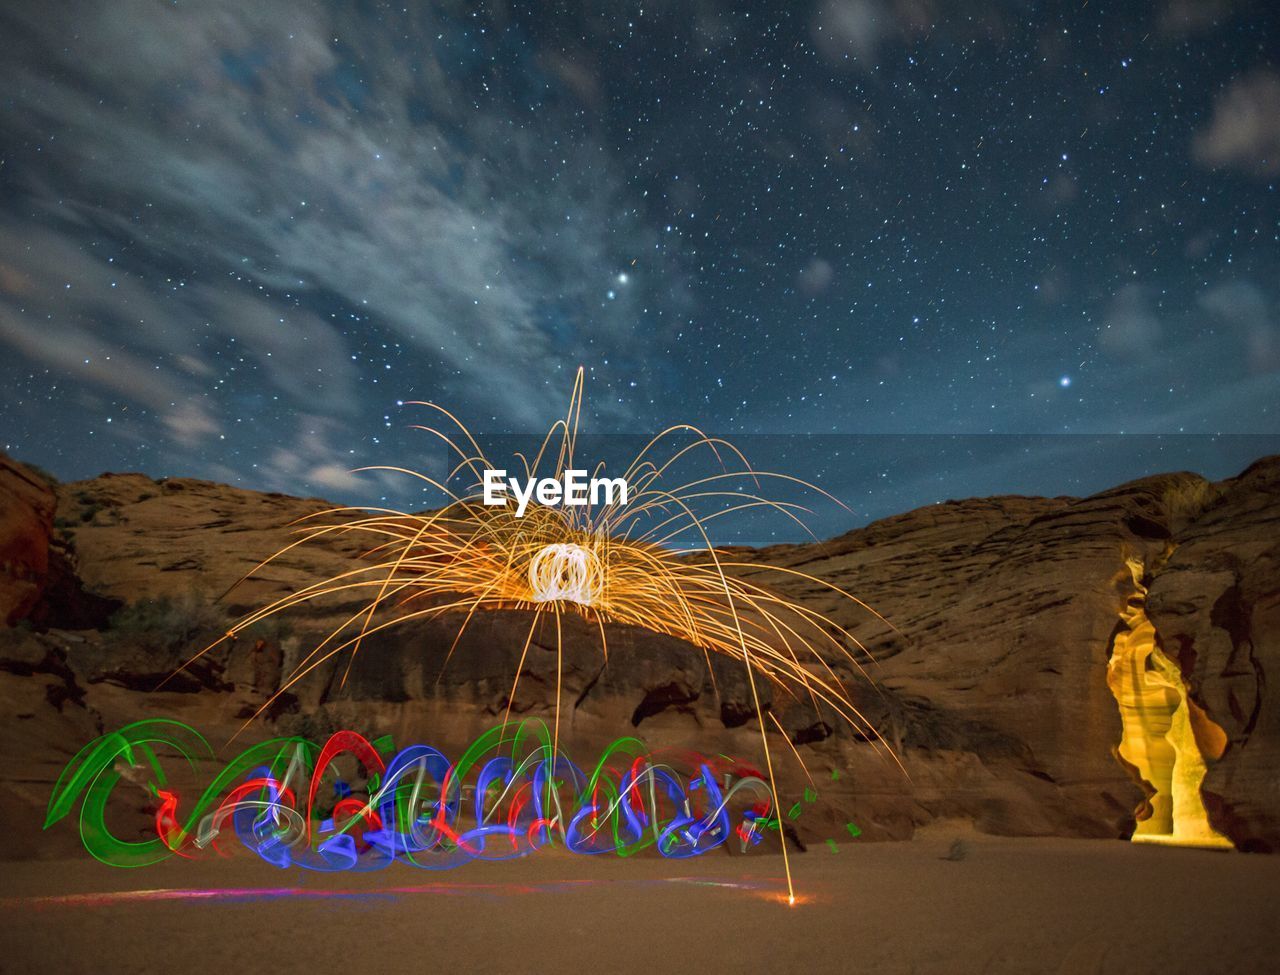 Light paintings by rock formations against star field at night